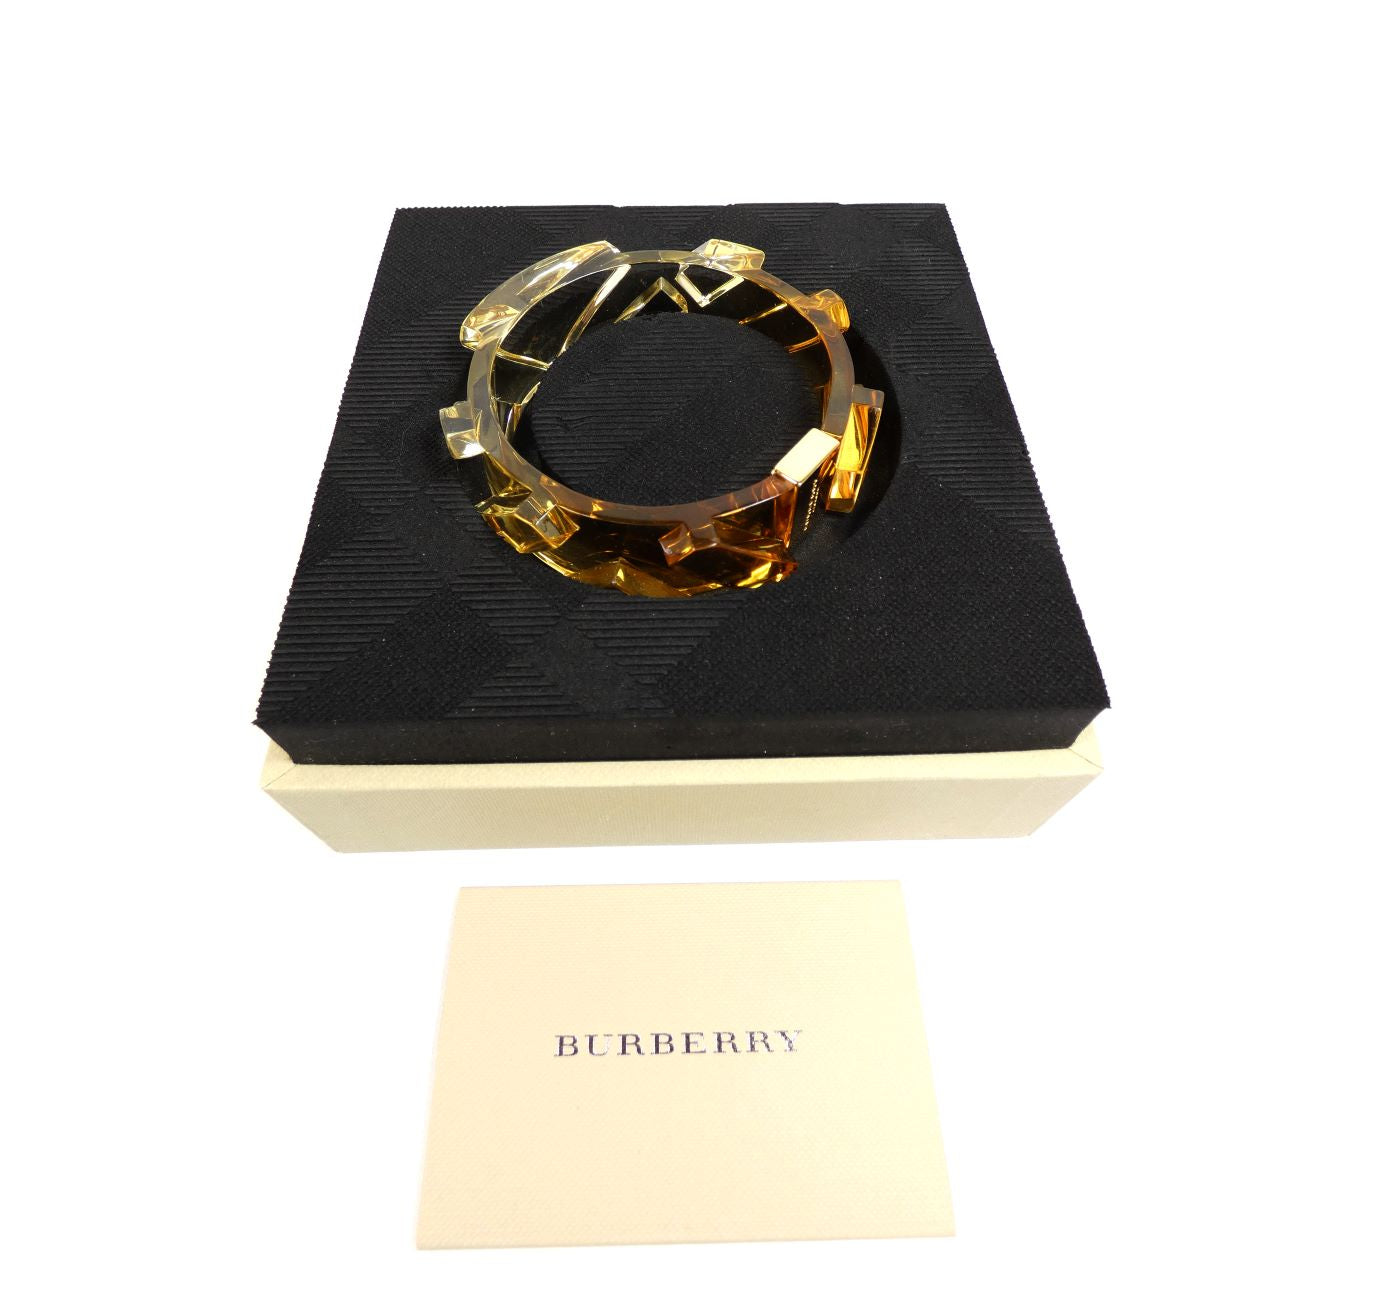 Burberry Multicolour Plastic Bangle | %%title%% %%page%% %%sep%%  %%sitename%% - The Changing Room